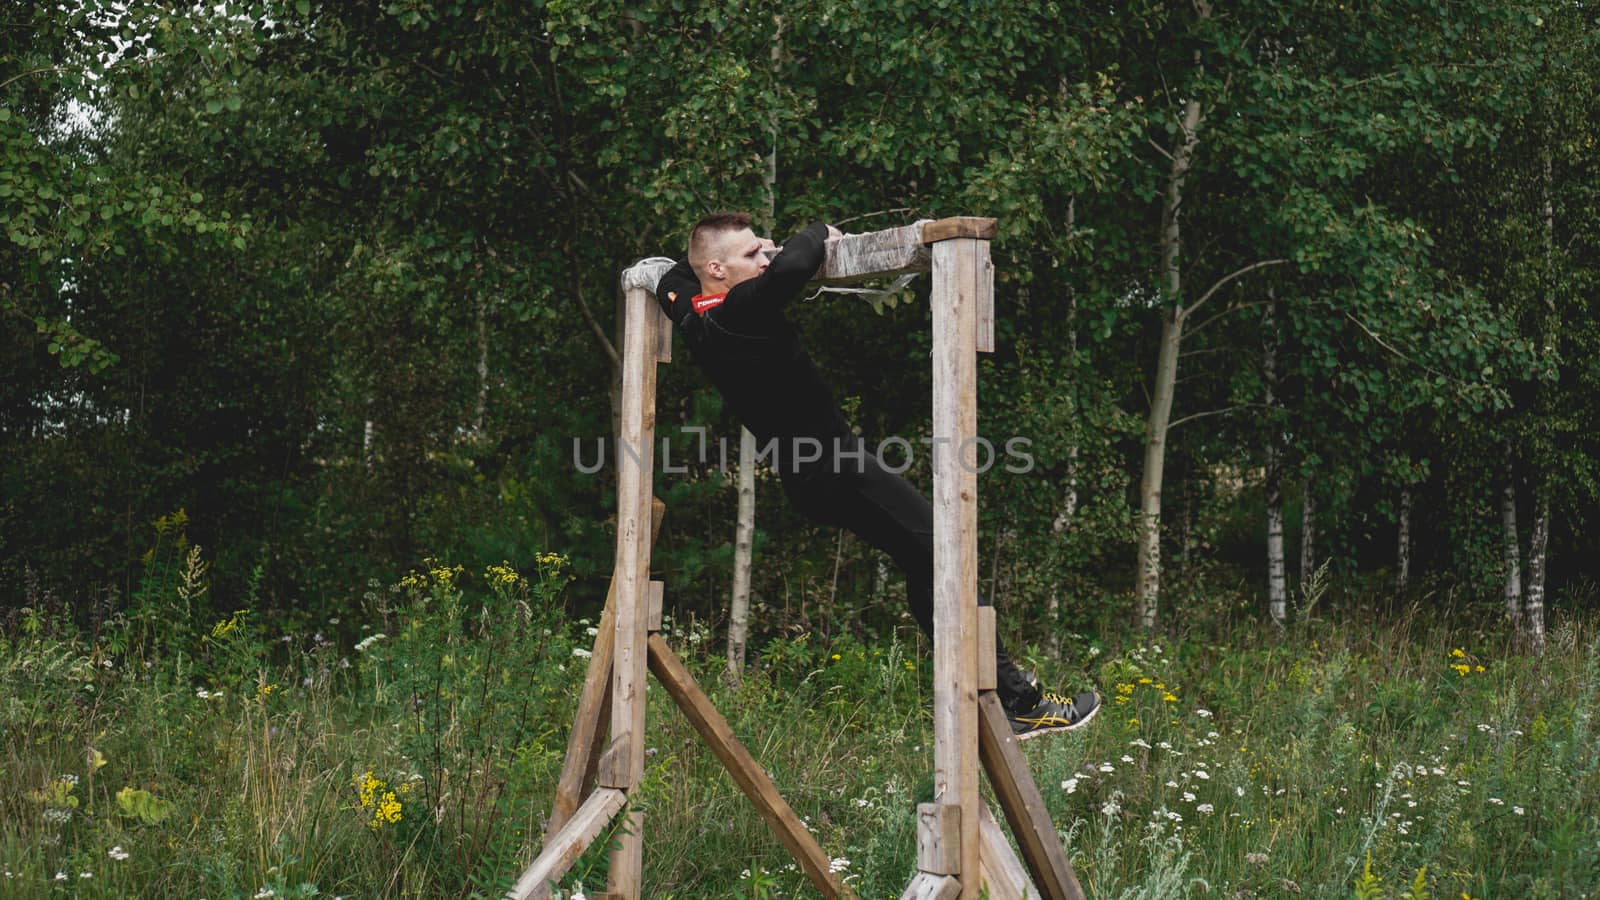 Man passing through hurdles during obstacle course in boot or sport competition